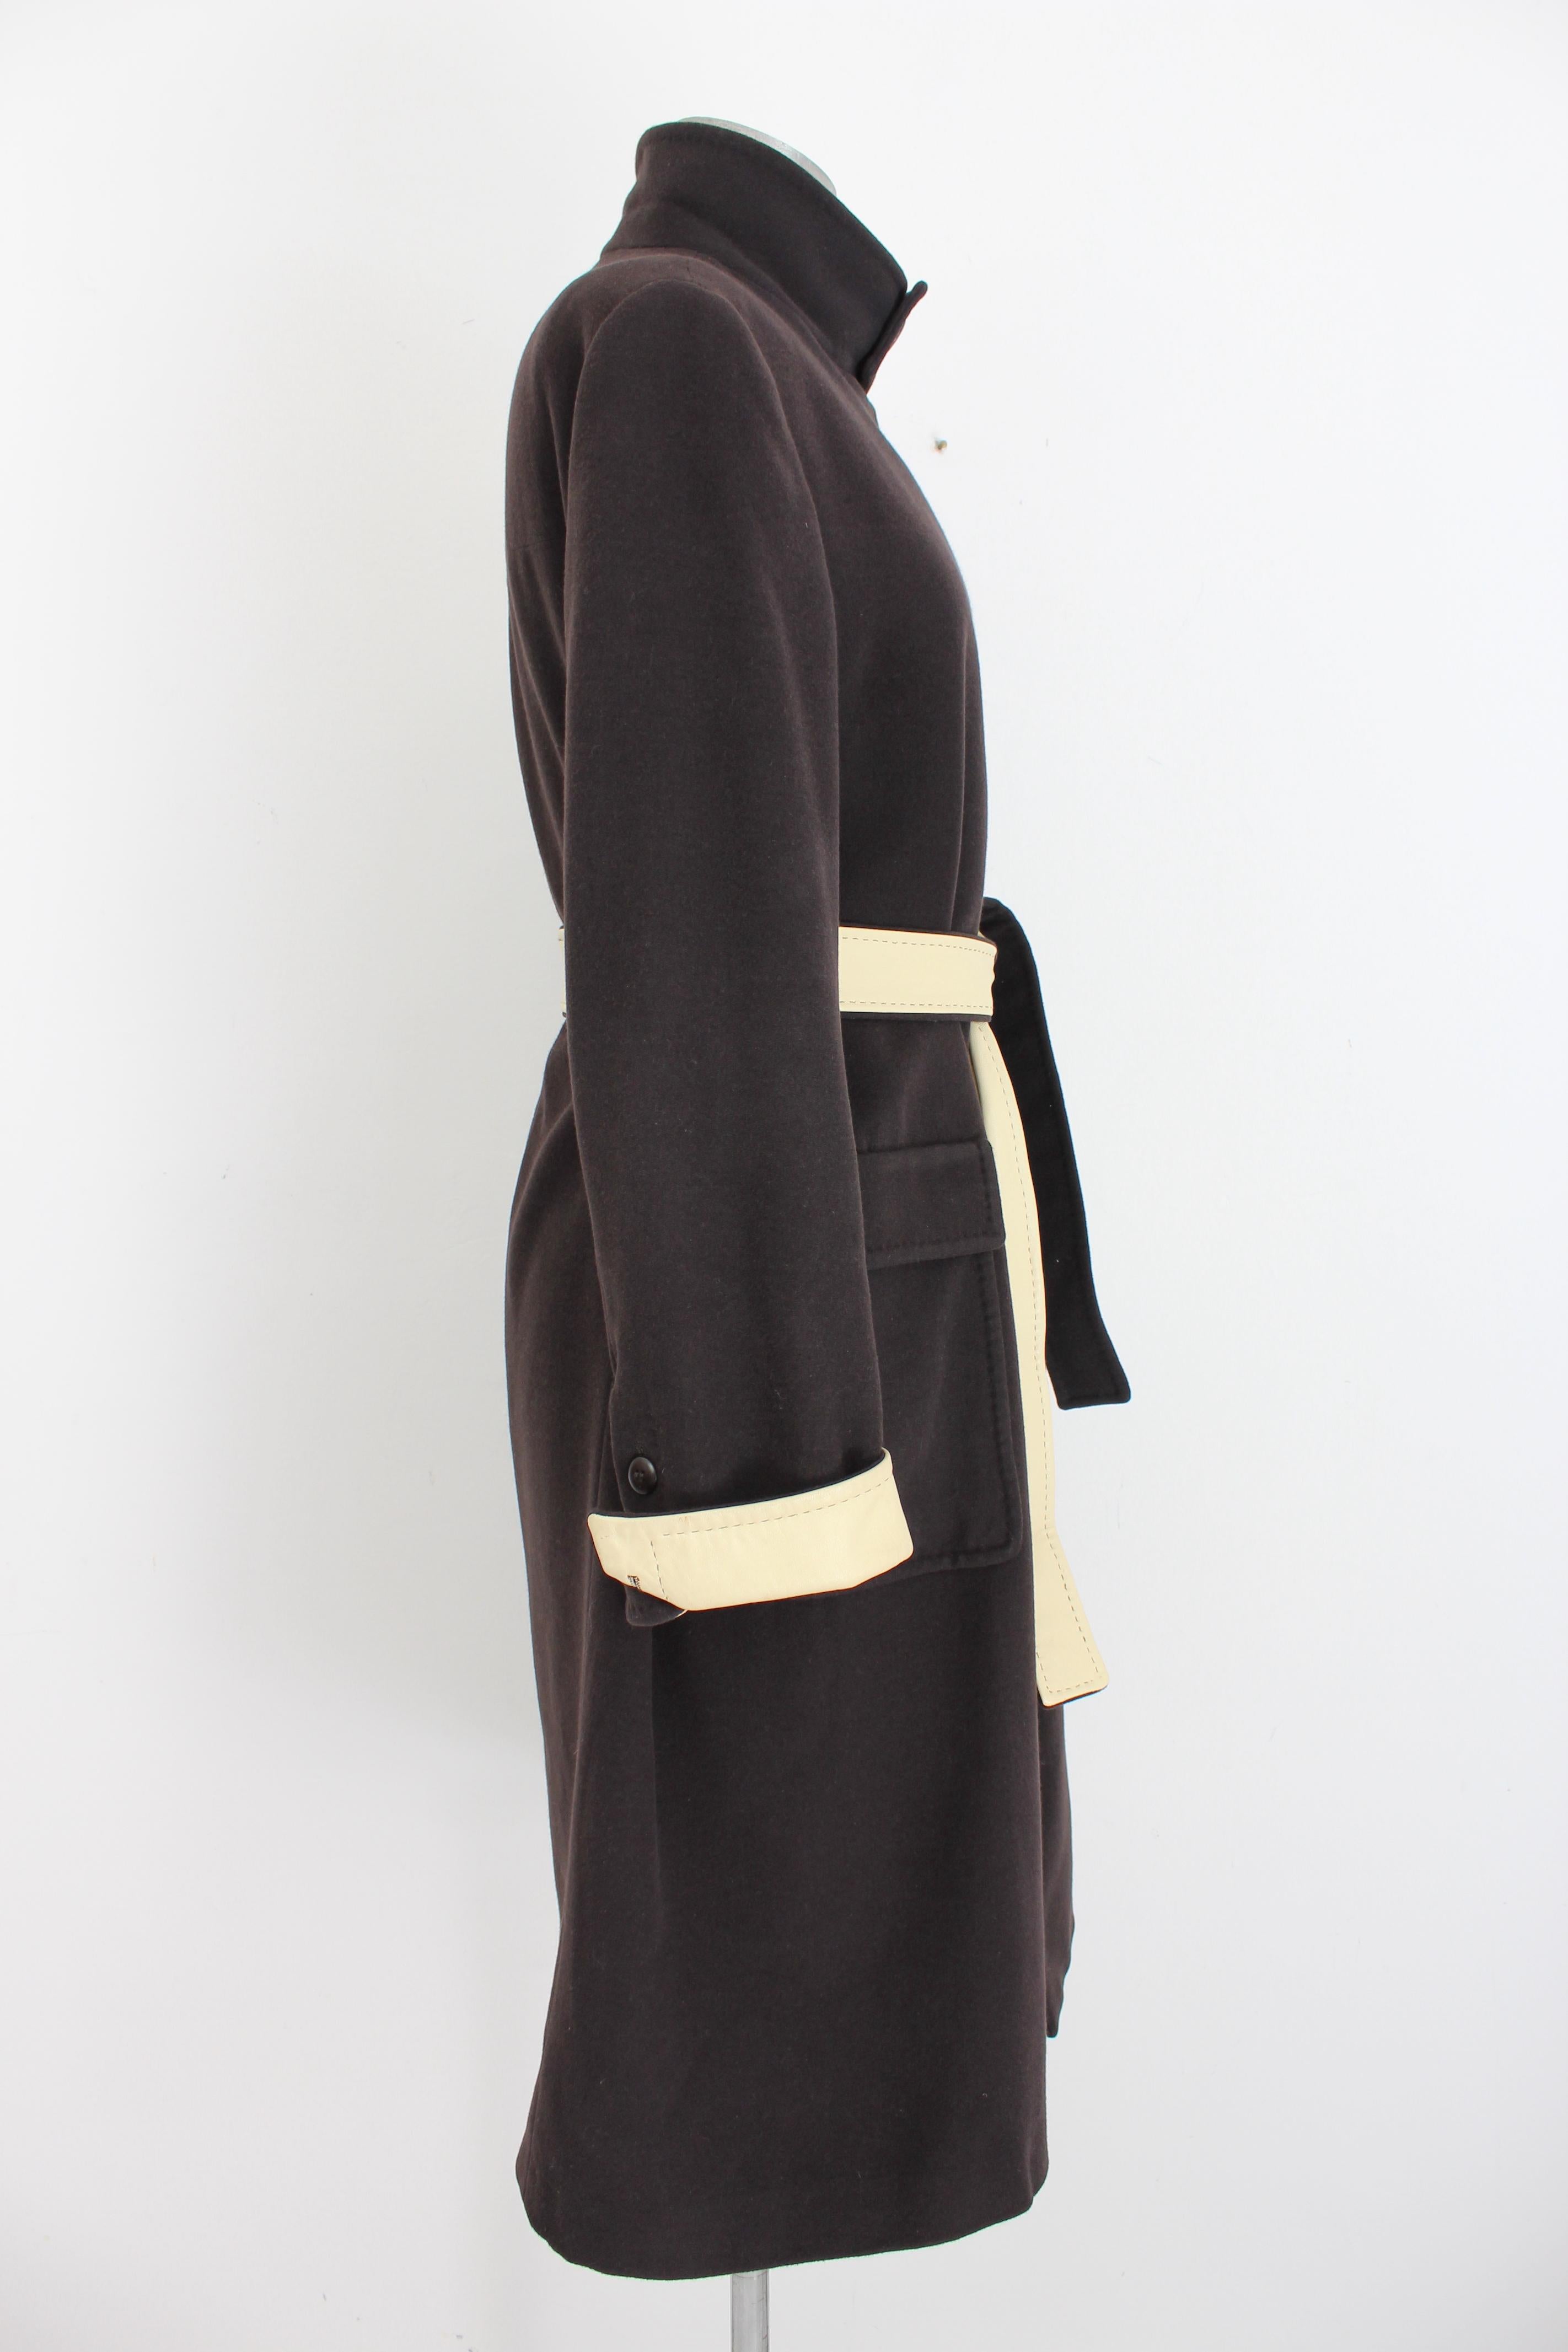 Hugo Boss Black Beige Cashmere Long Classic Coat In Good Condition In Brindisi, Bt